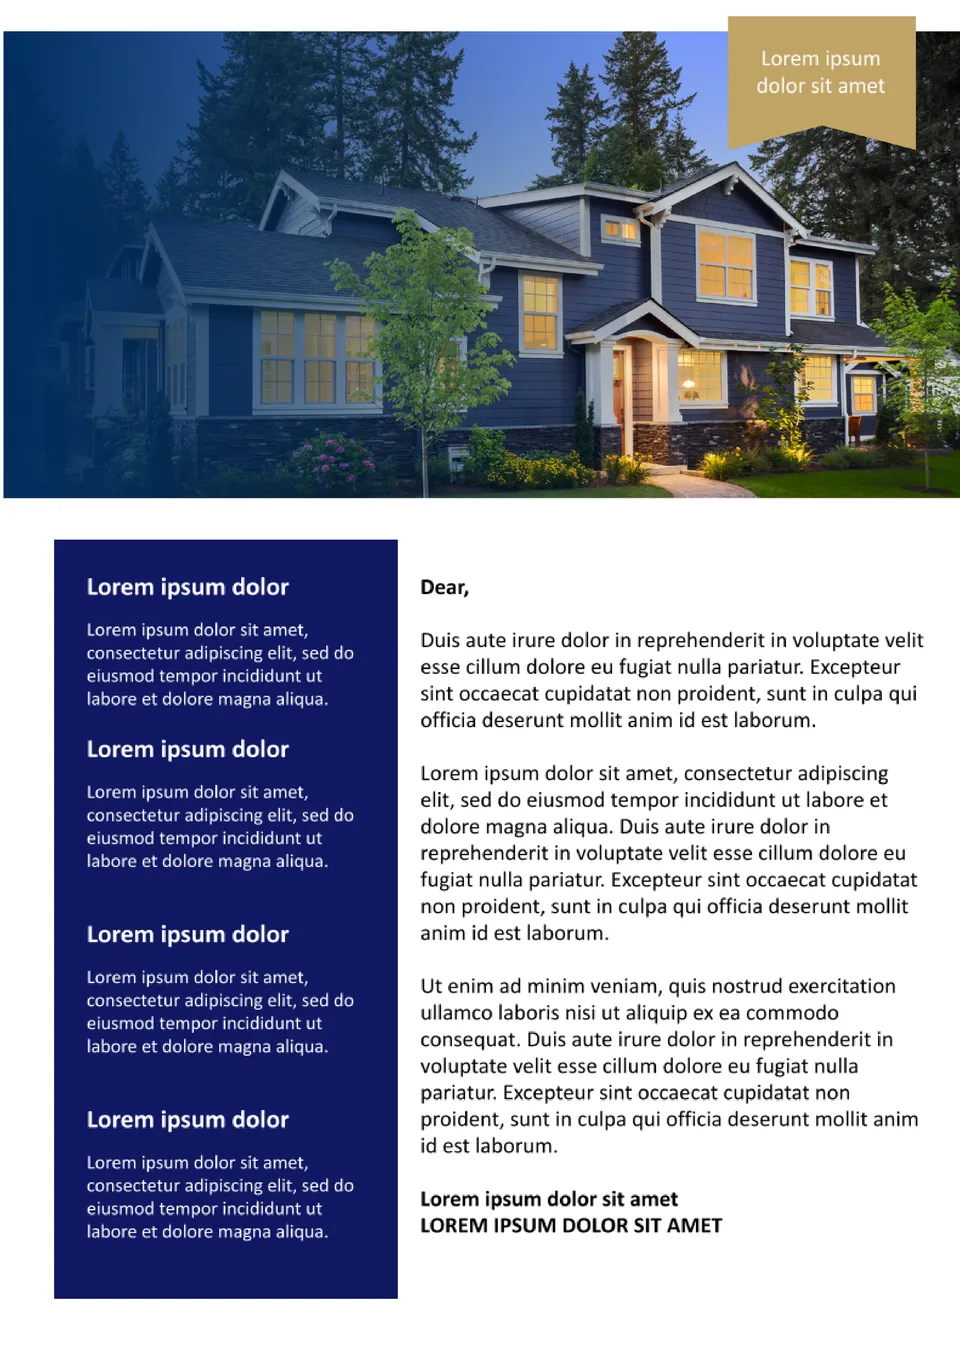 Home Offer Letter Template